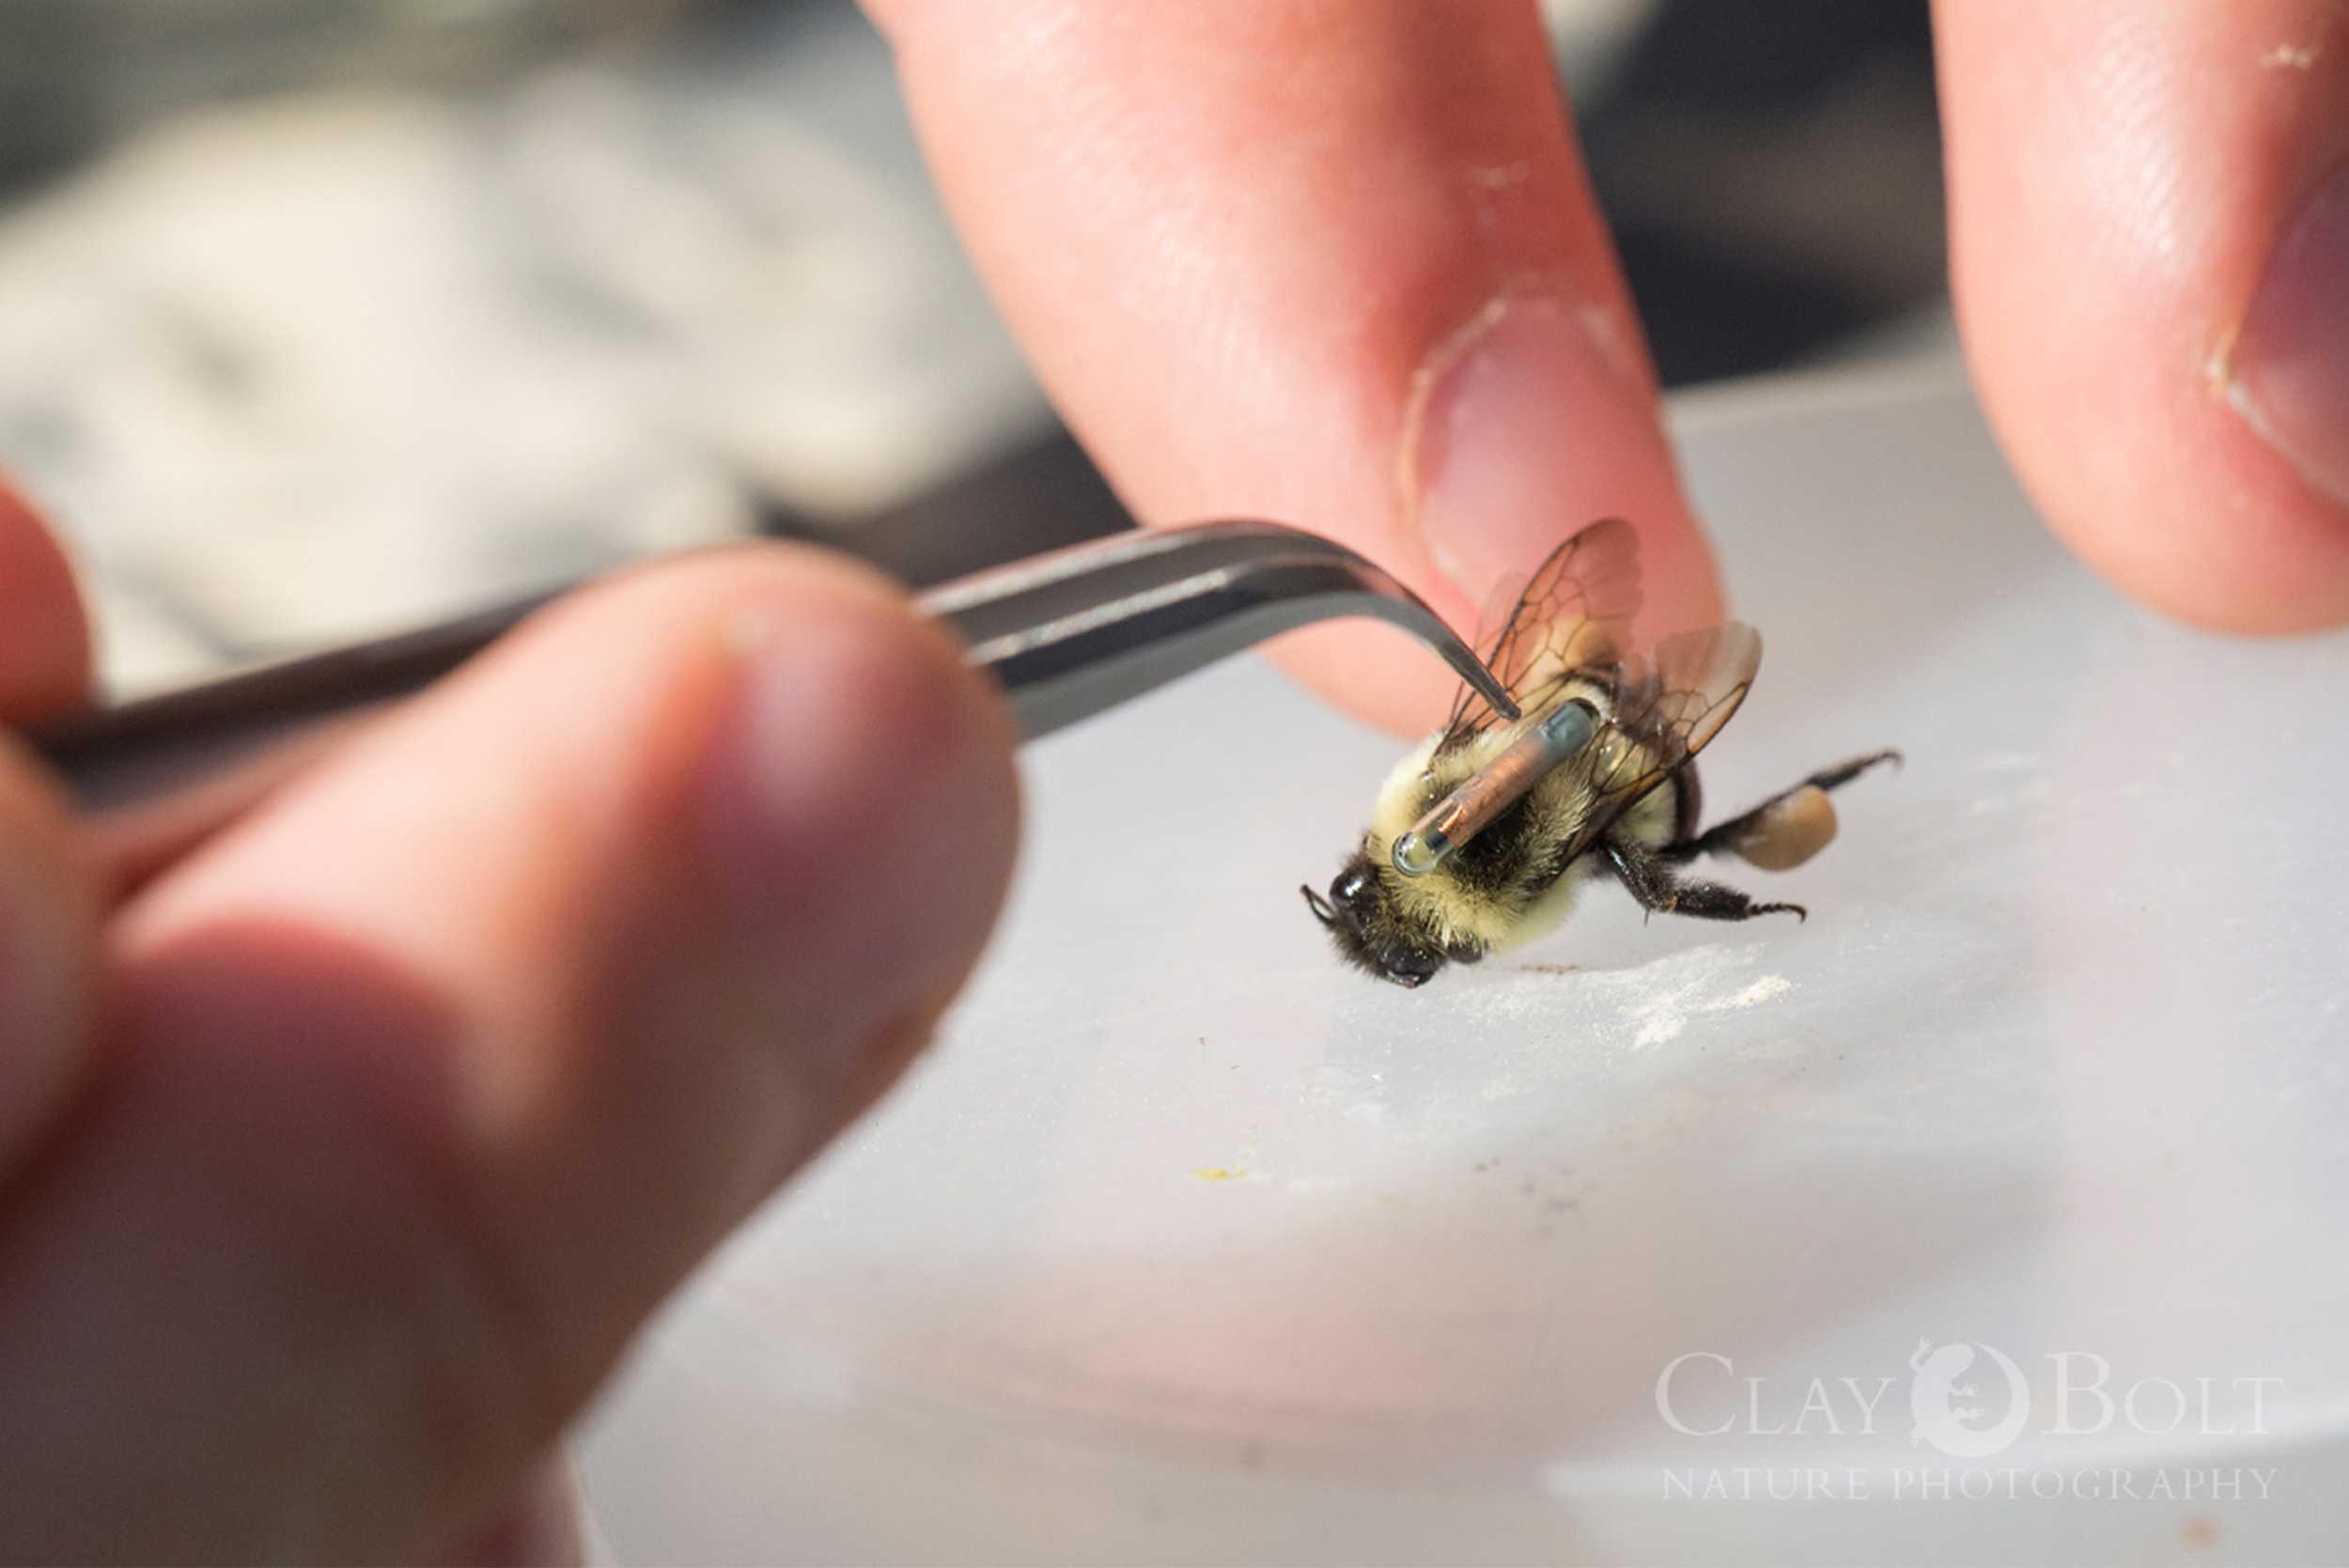  Biologist Jeremy Hemberger carefully applies a very small RFID tracking device to a common eastern bumble bee ( Bombus impatiens ). This device will provide valuable information about the duration of the bee's foraging trips away from the nest. 